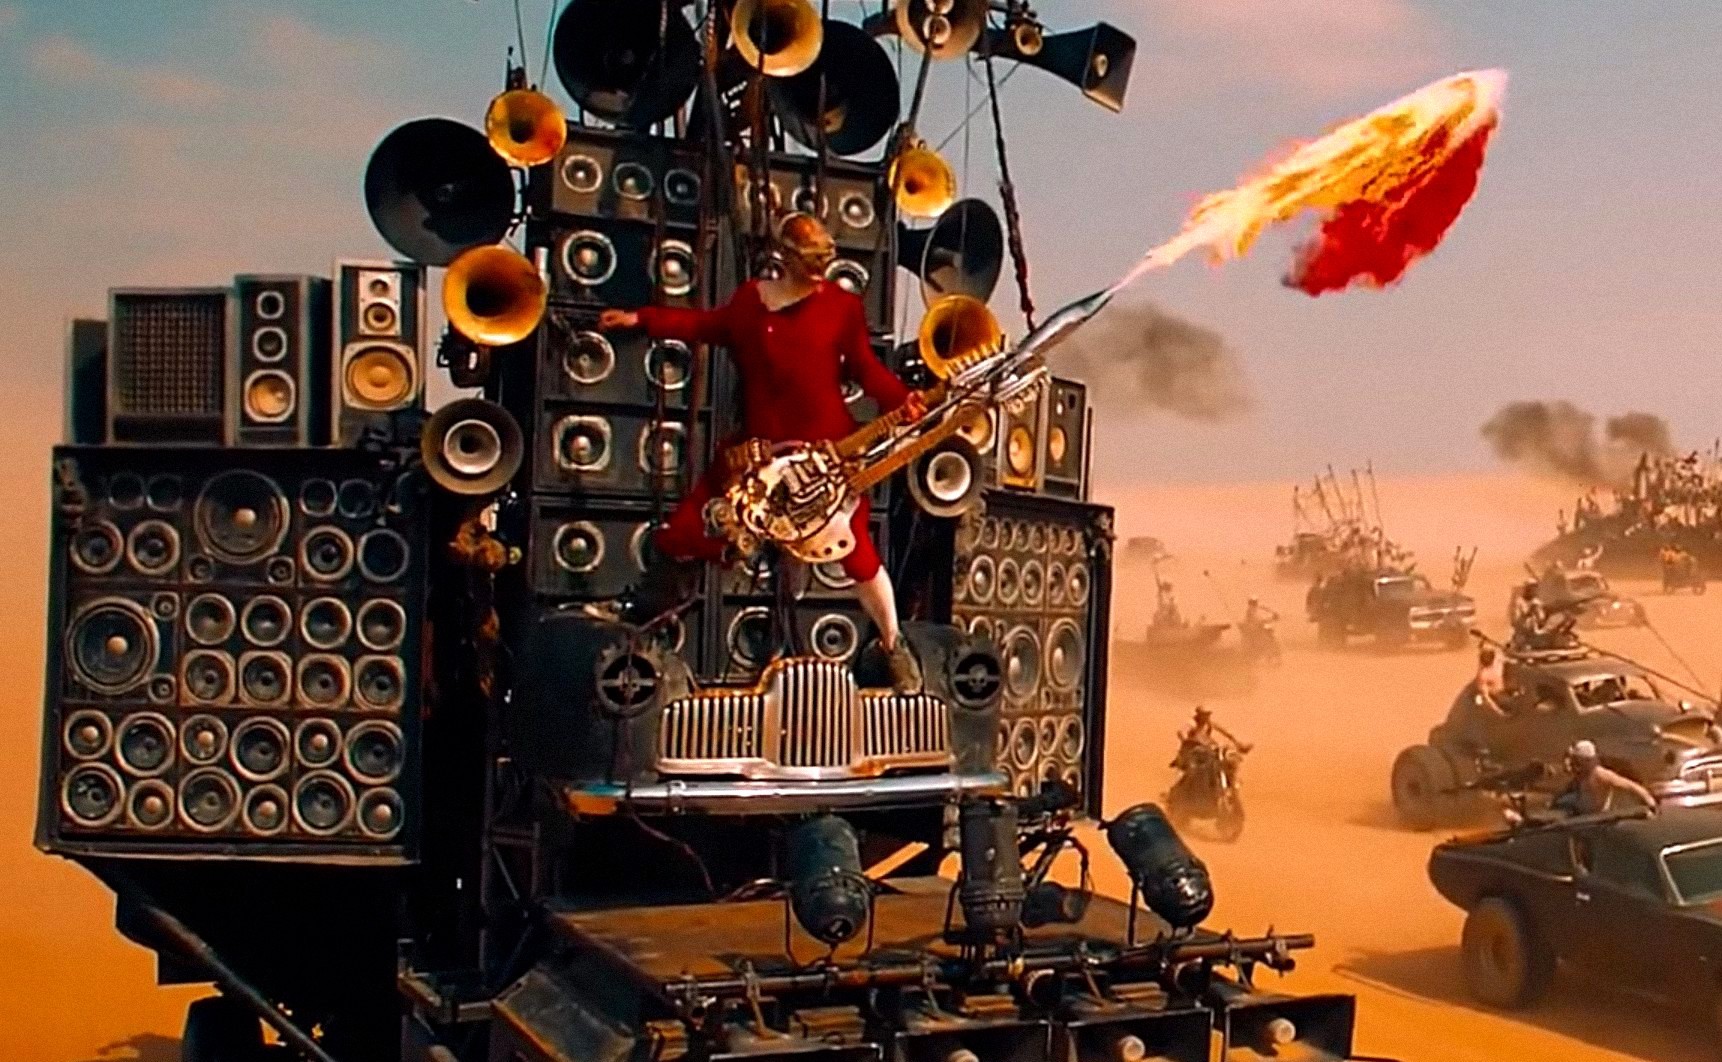 Coma the Doof Warrior, a man in red long johns and a skull mask, blasts fire from an electric guitar while standing atop a vehicle made out of stacked speakers in George Miller’s Mad Max: Fury Road